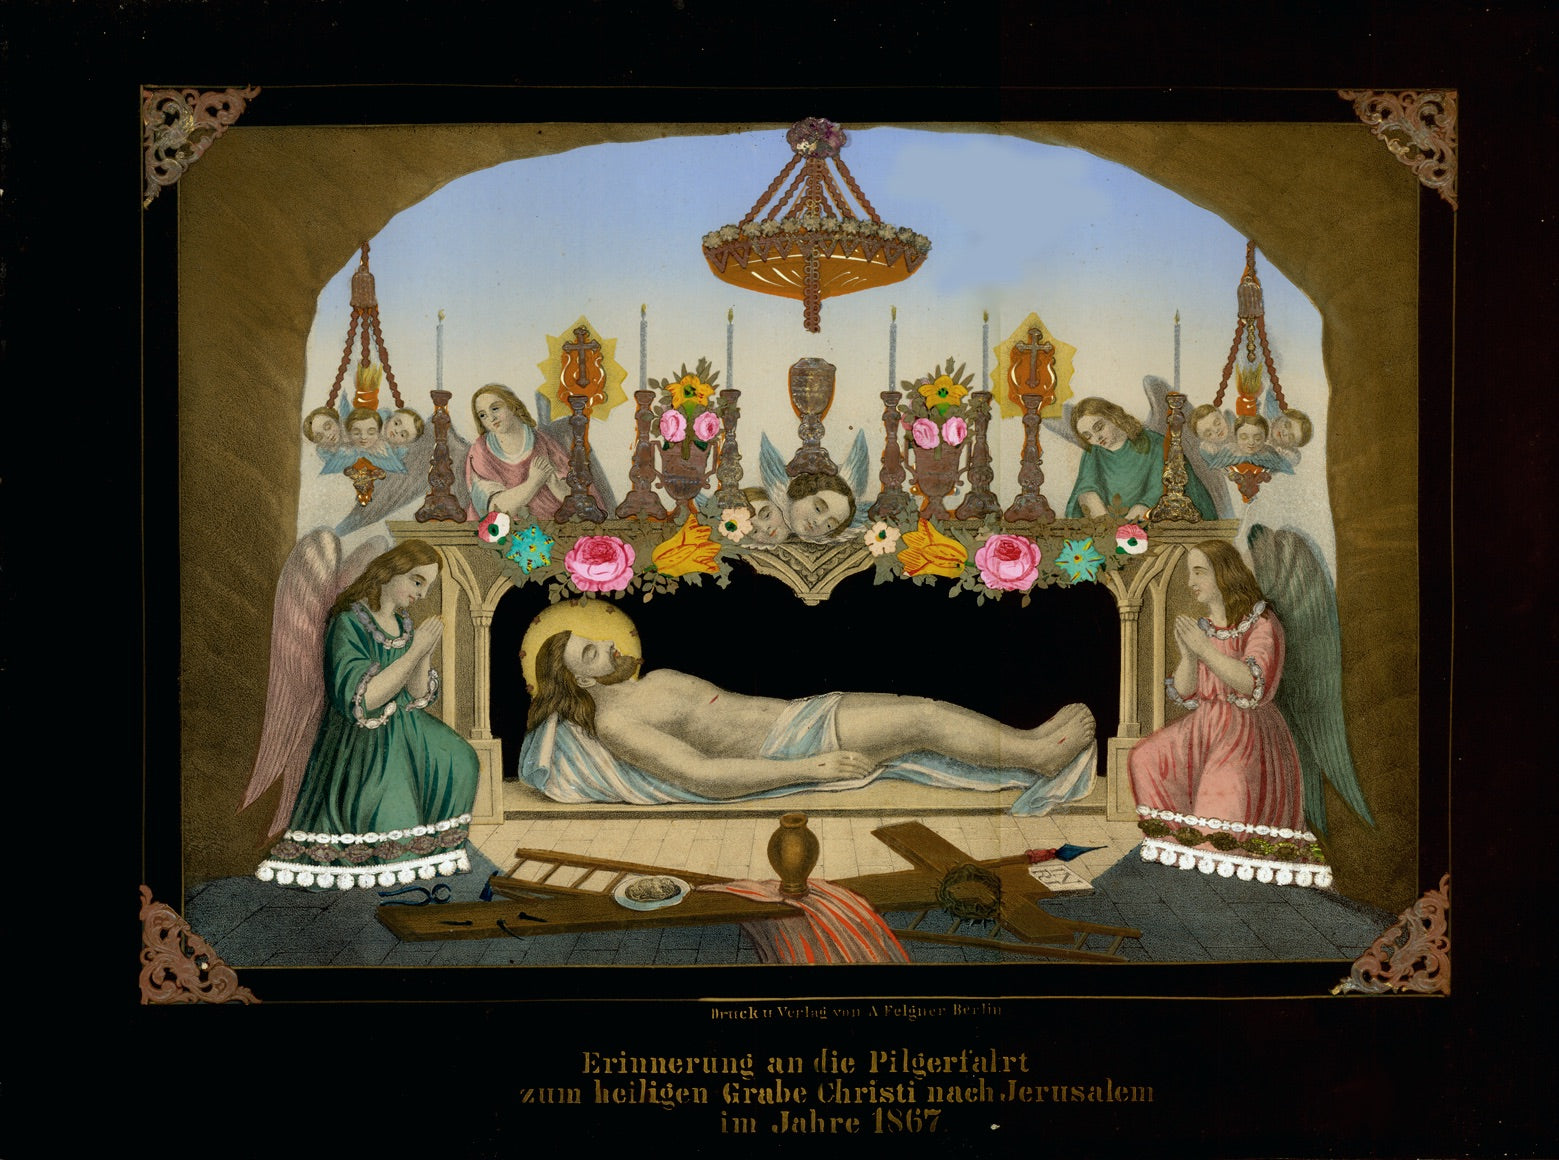 "Erinnerung an die Pilgerfahrt zum heiligen Grabe Christi nach Jerusalem im Jahre 1867"  (Reminiscense of the pilgrimage to the Holy Sepulcher of Christ to Jerusalem, 1867)  Chromolithograph printed in color and adorned with lacquer flowers, raised silver lace and raised silver and gold decor on challise, candle sticks, lamps and dress bordures. The four corners of lithograph raised with decorative silver triangles.An elaborate extremely well preserved religious piece of art.  Published by Felgner. Berlin, 